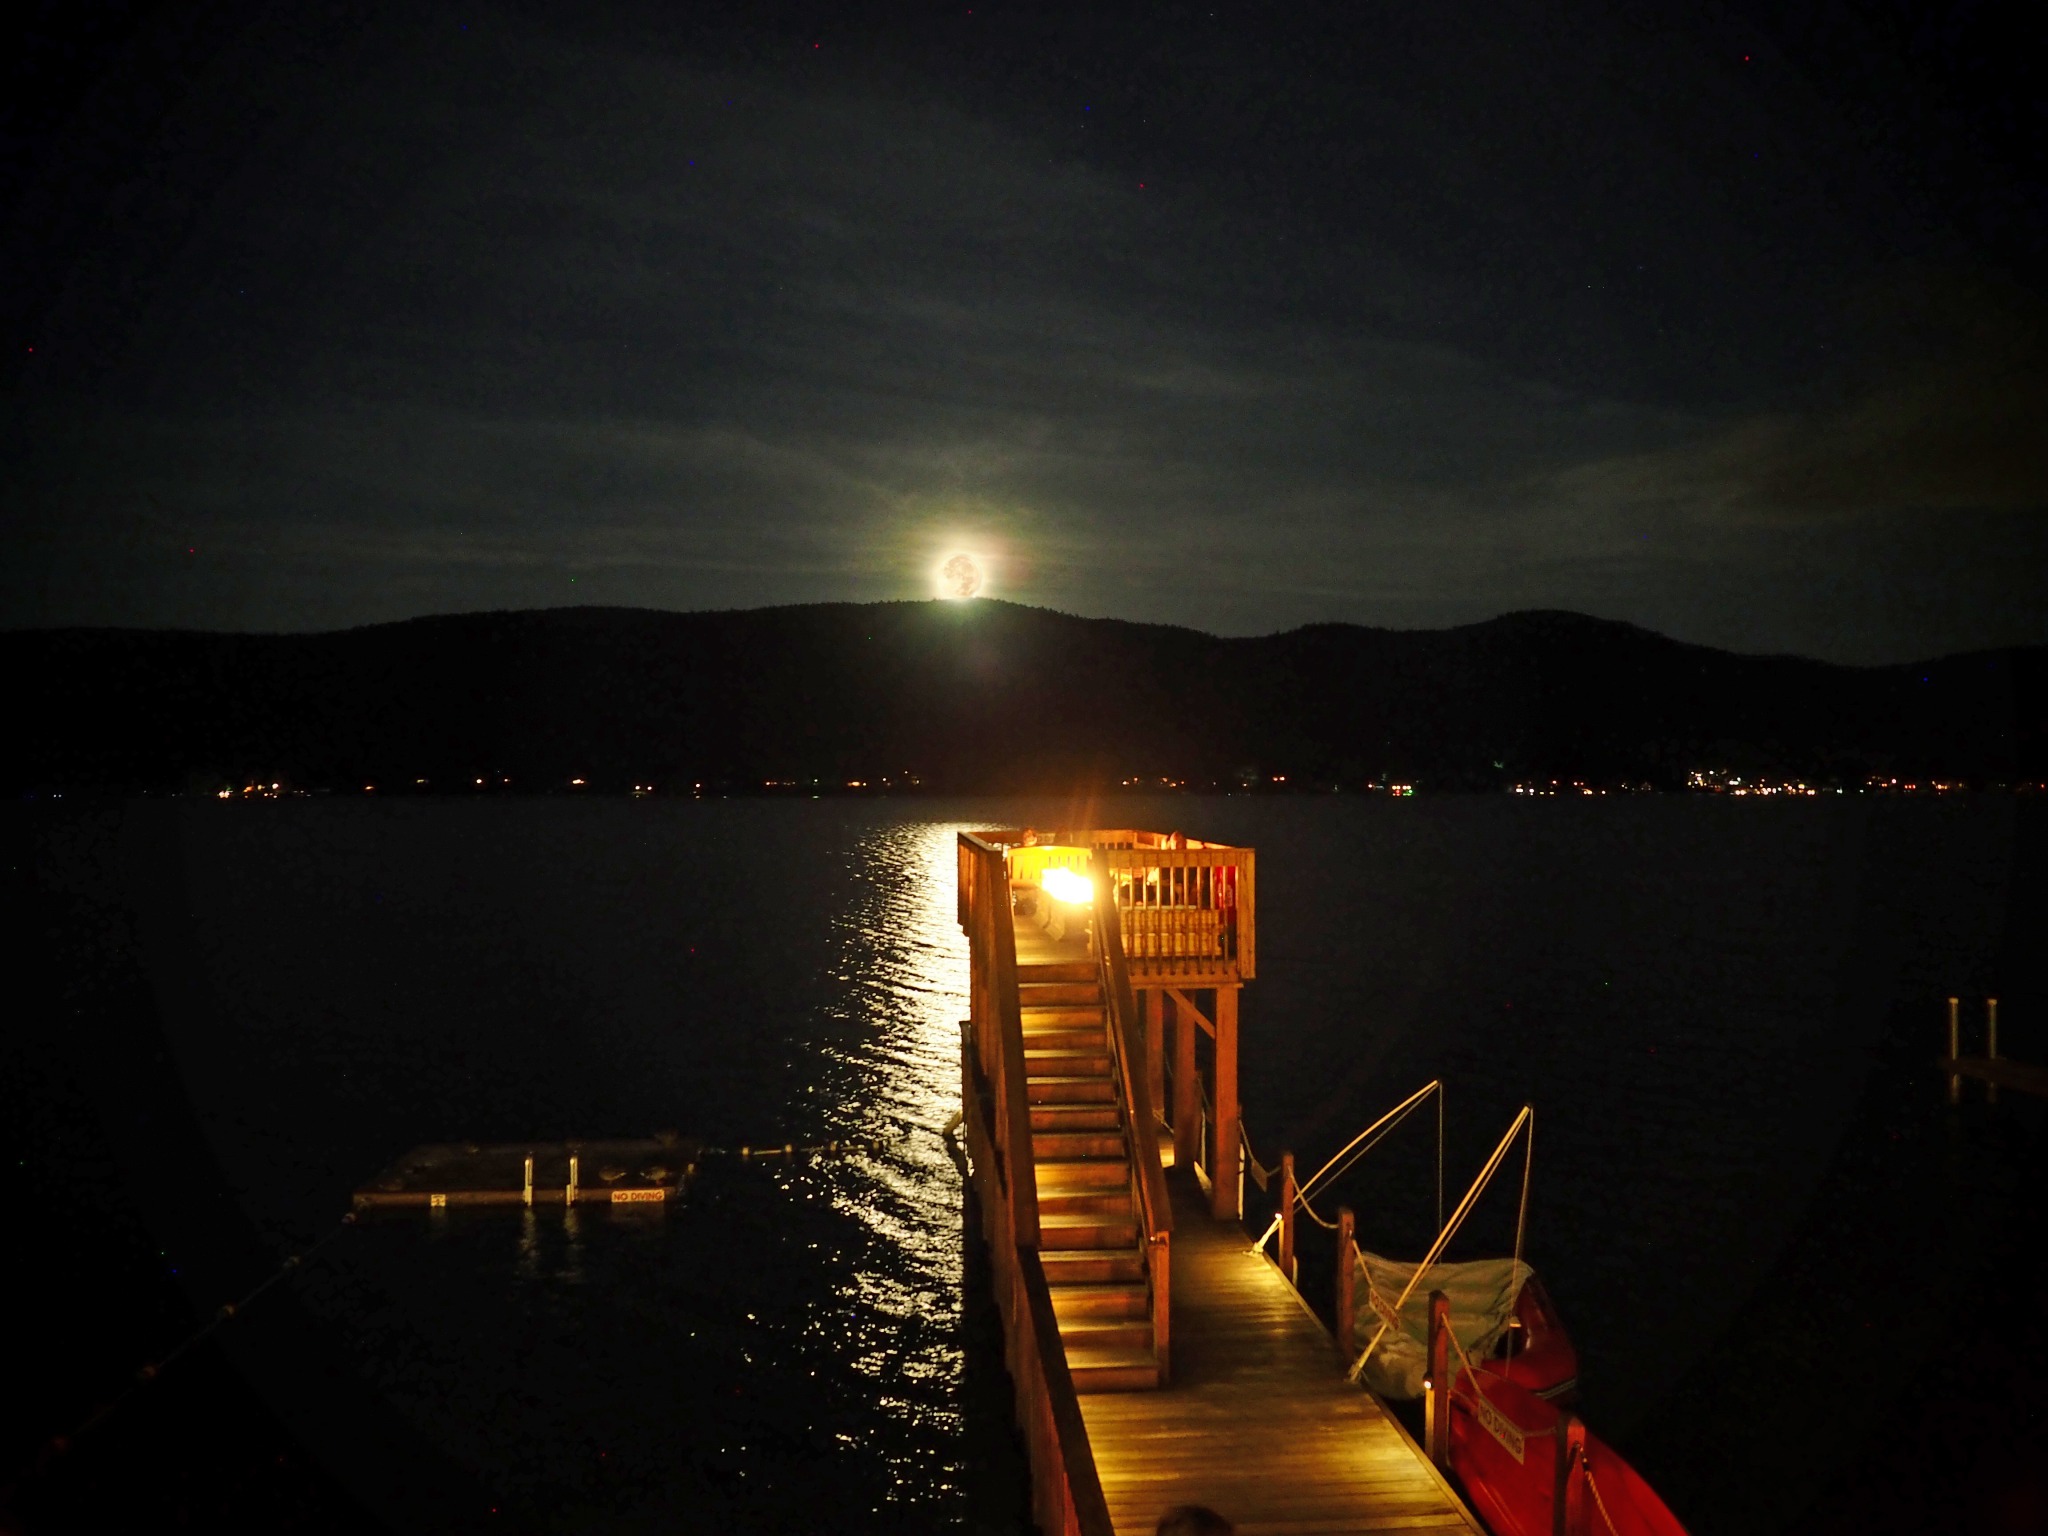 The Lake Motel observation deck looking at a full moon